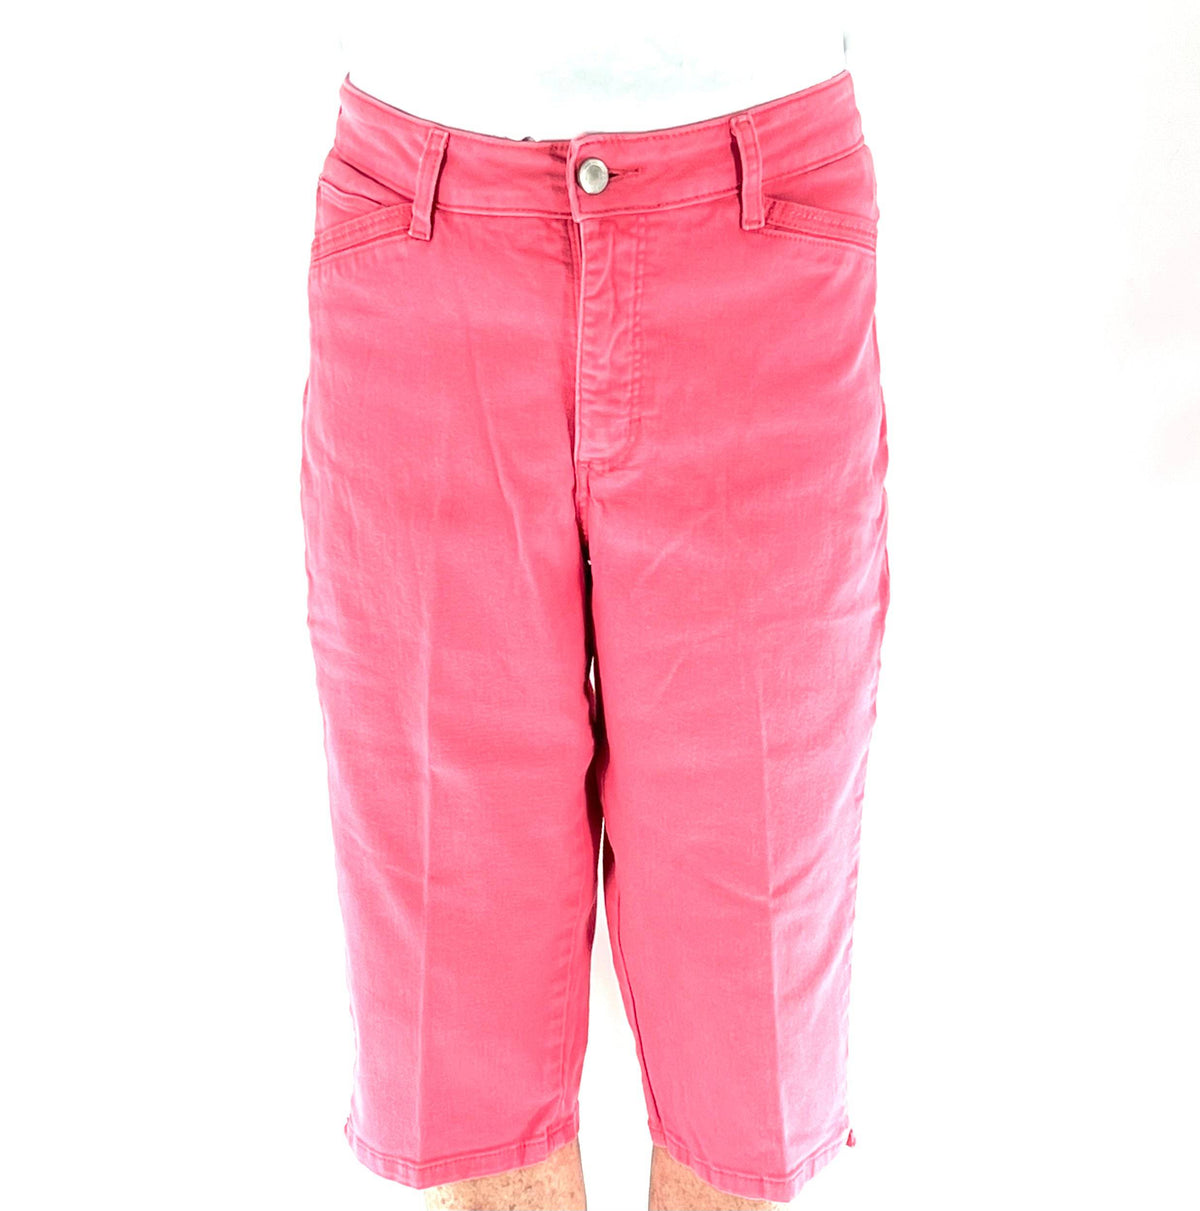 Womens Size 14 Lee Capris Classic Fit Pink -Used- 5 Pocket Jeans Zip and  Button Closure